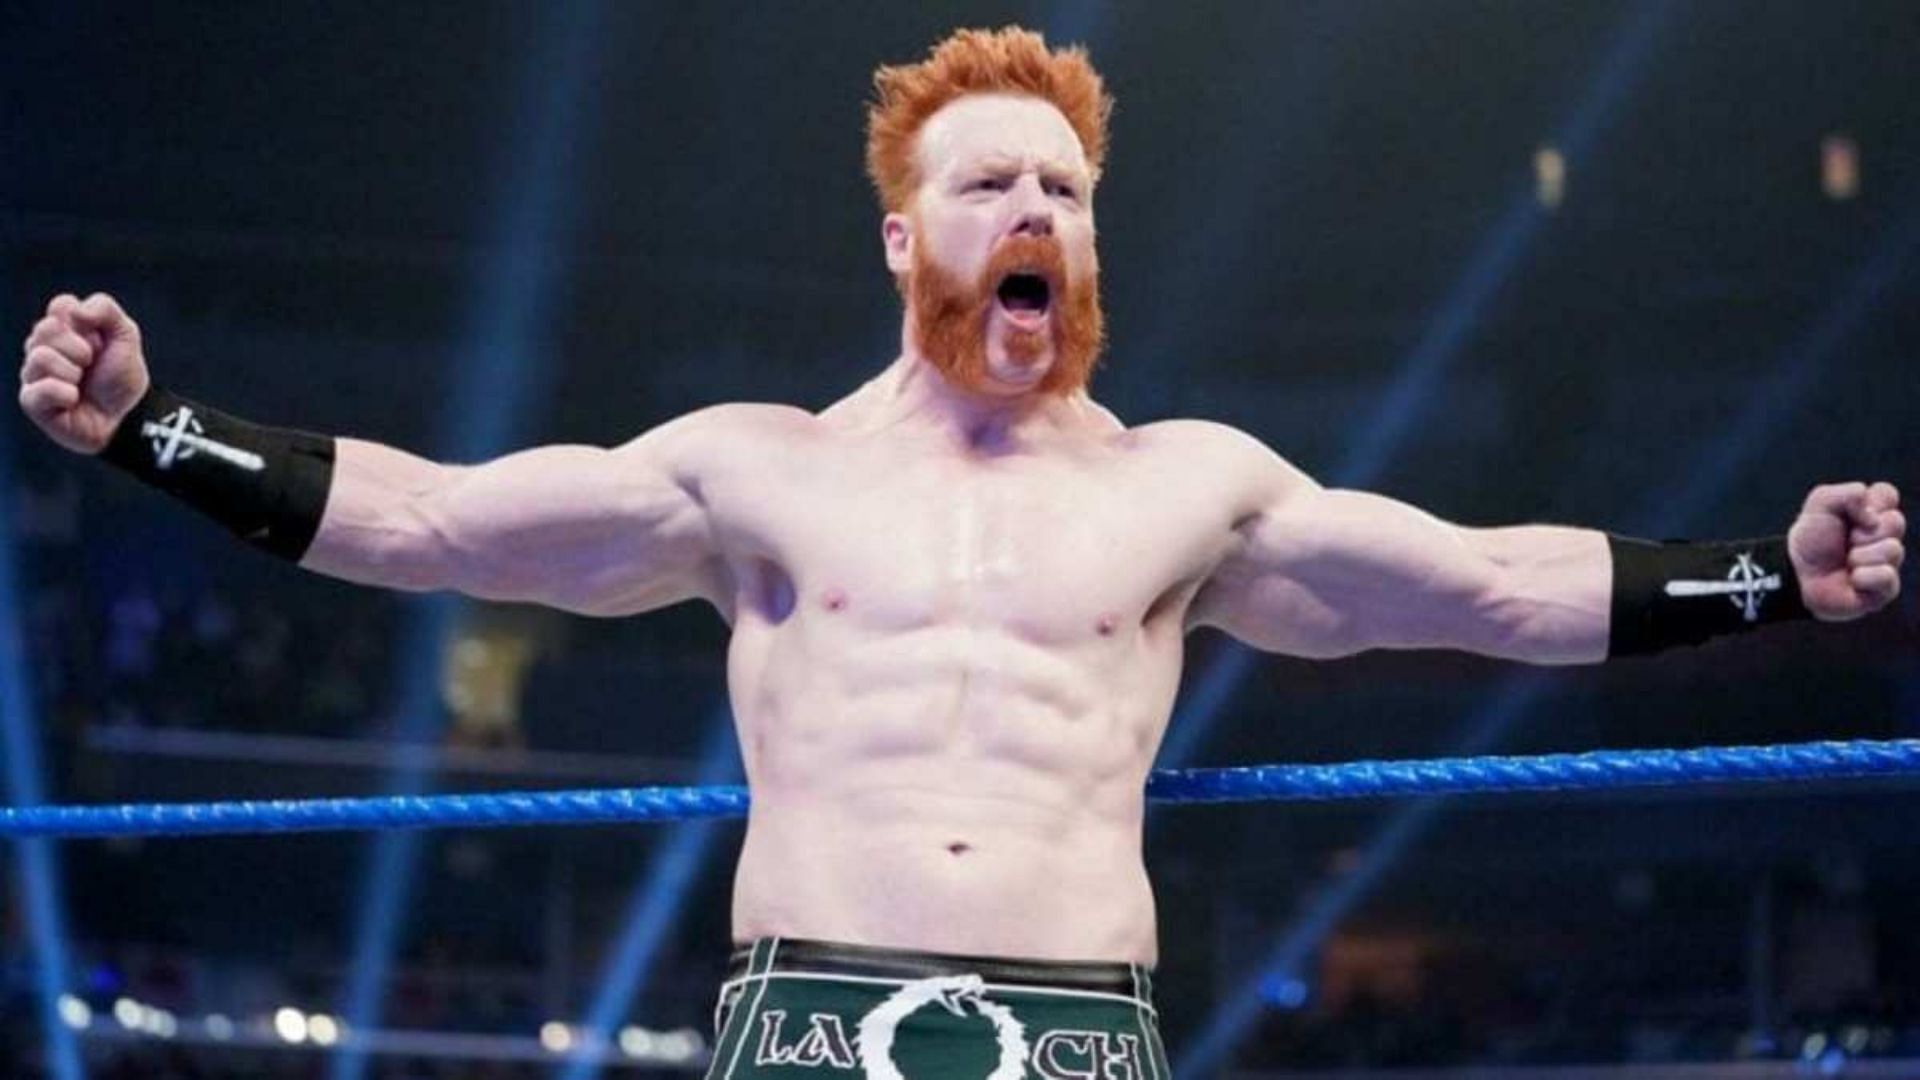 Sheamus is one of WWE most decorated performers